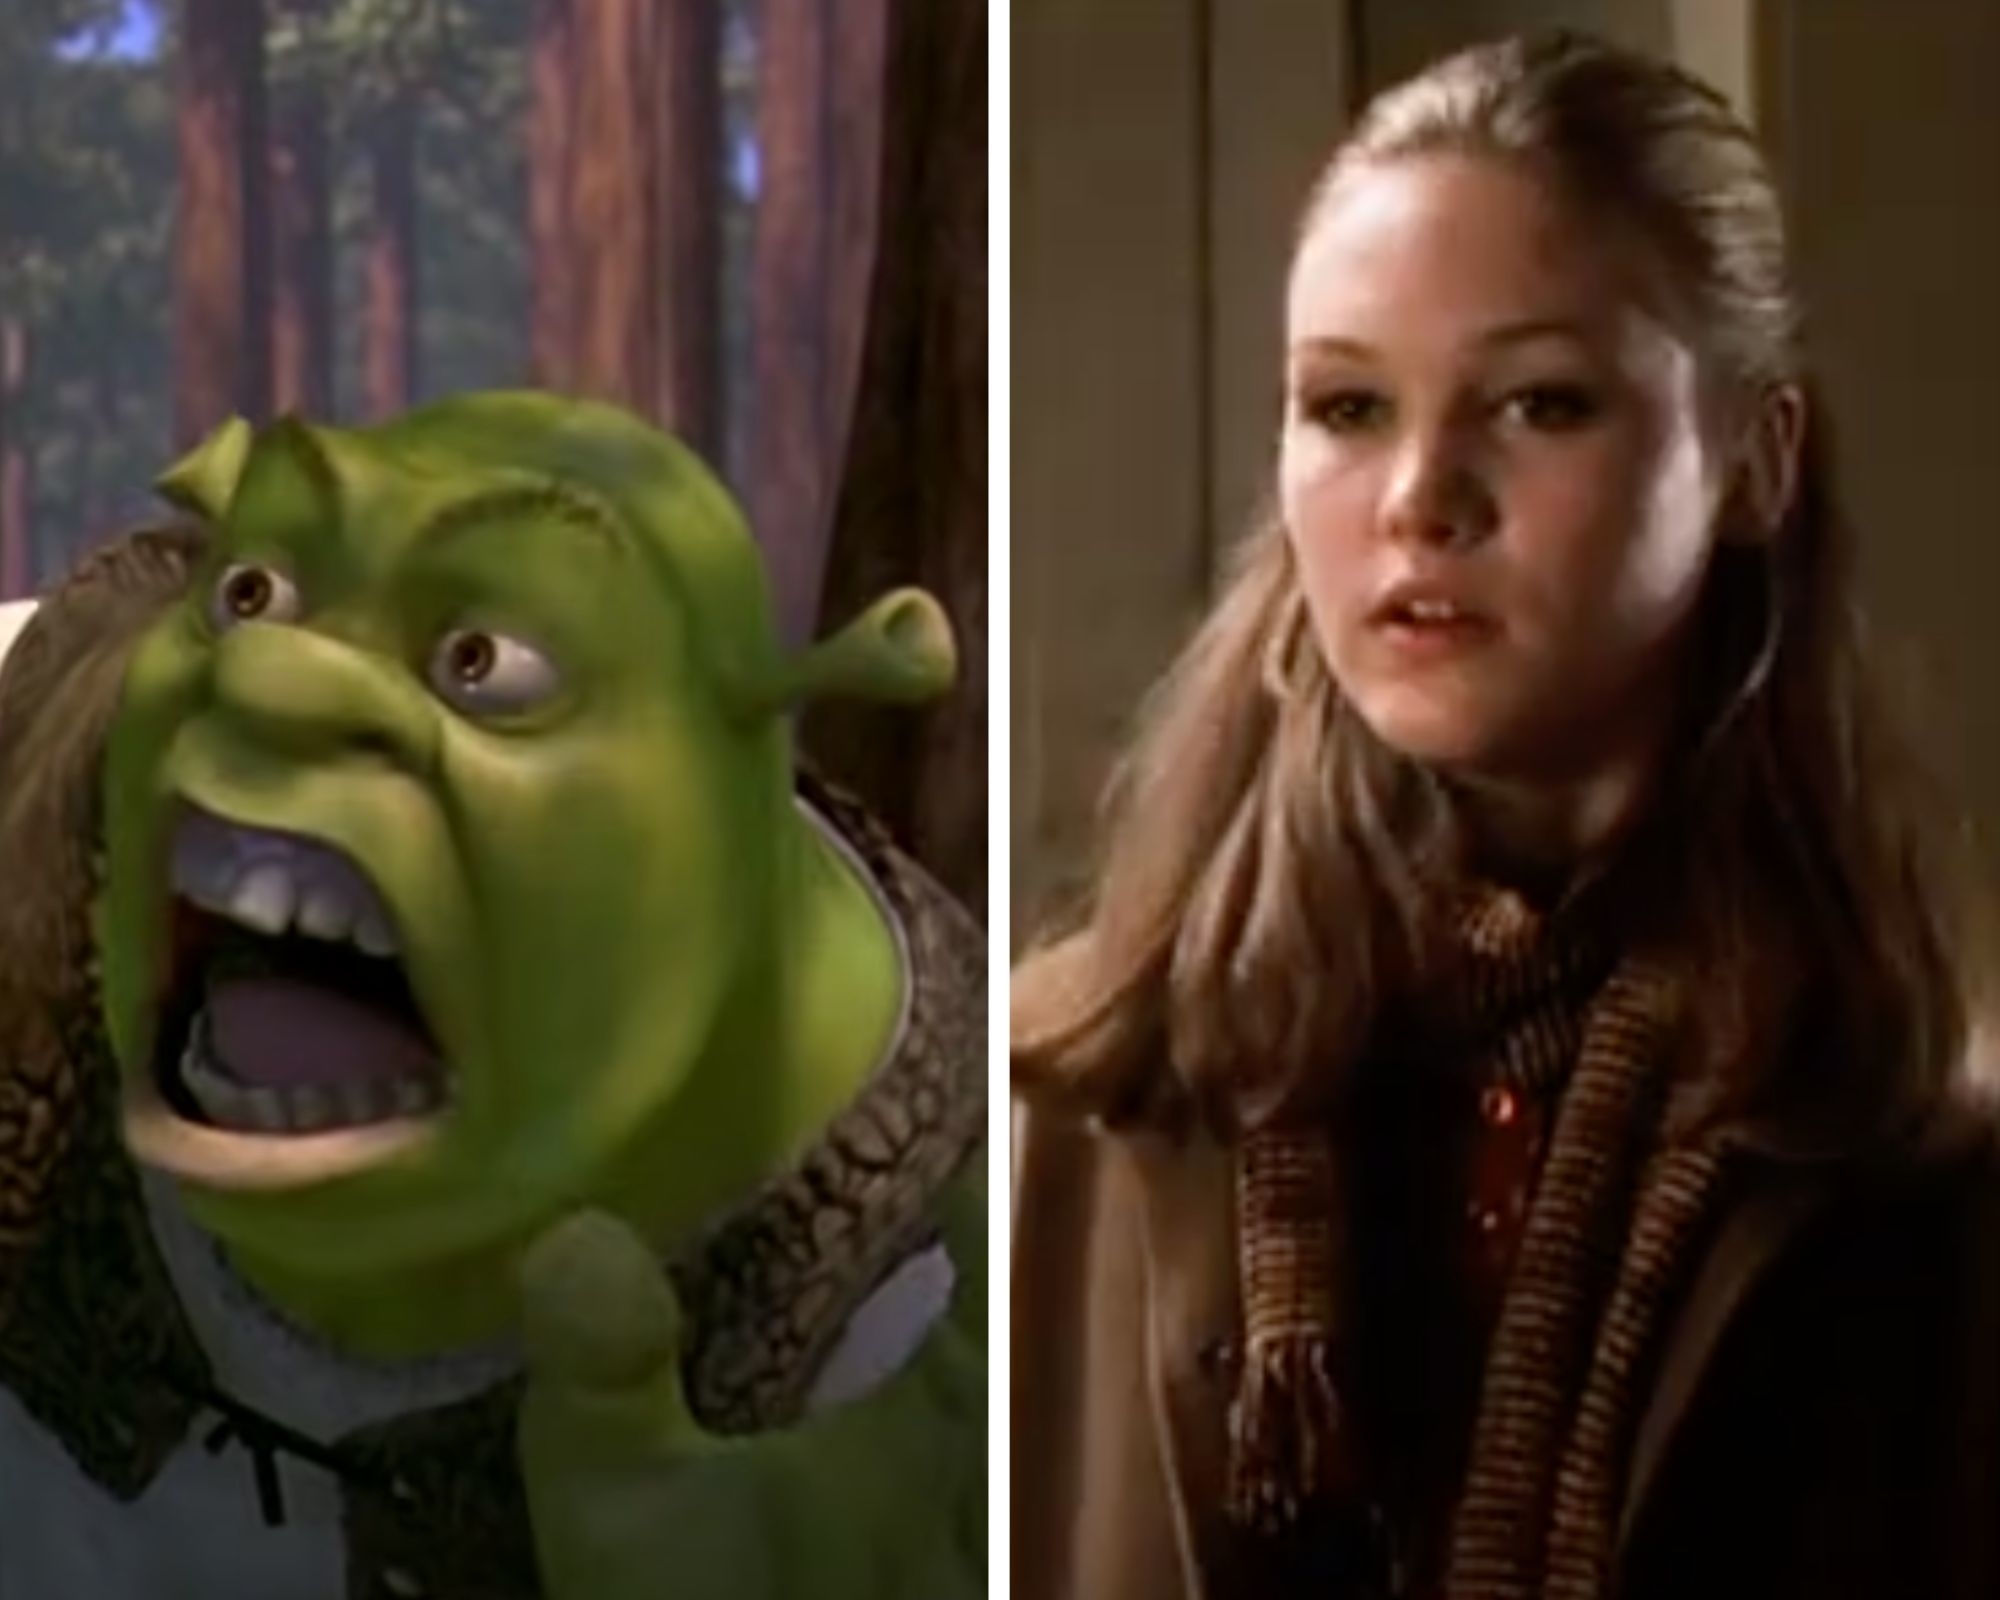 Mike Myers Shrek character, and Julia Stiles in Save the Last Dance